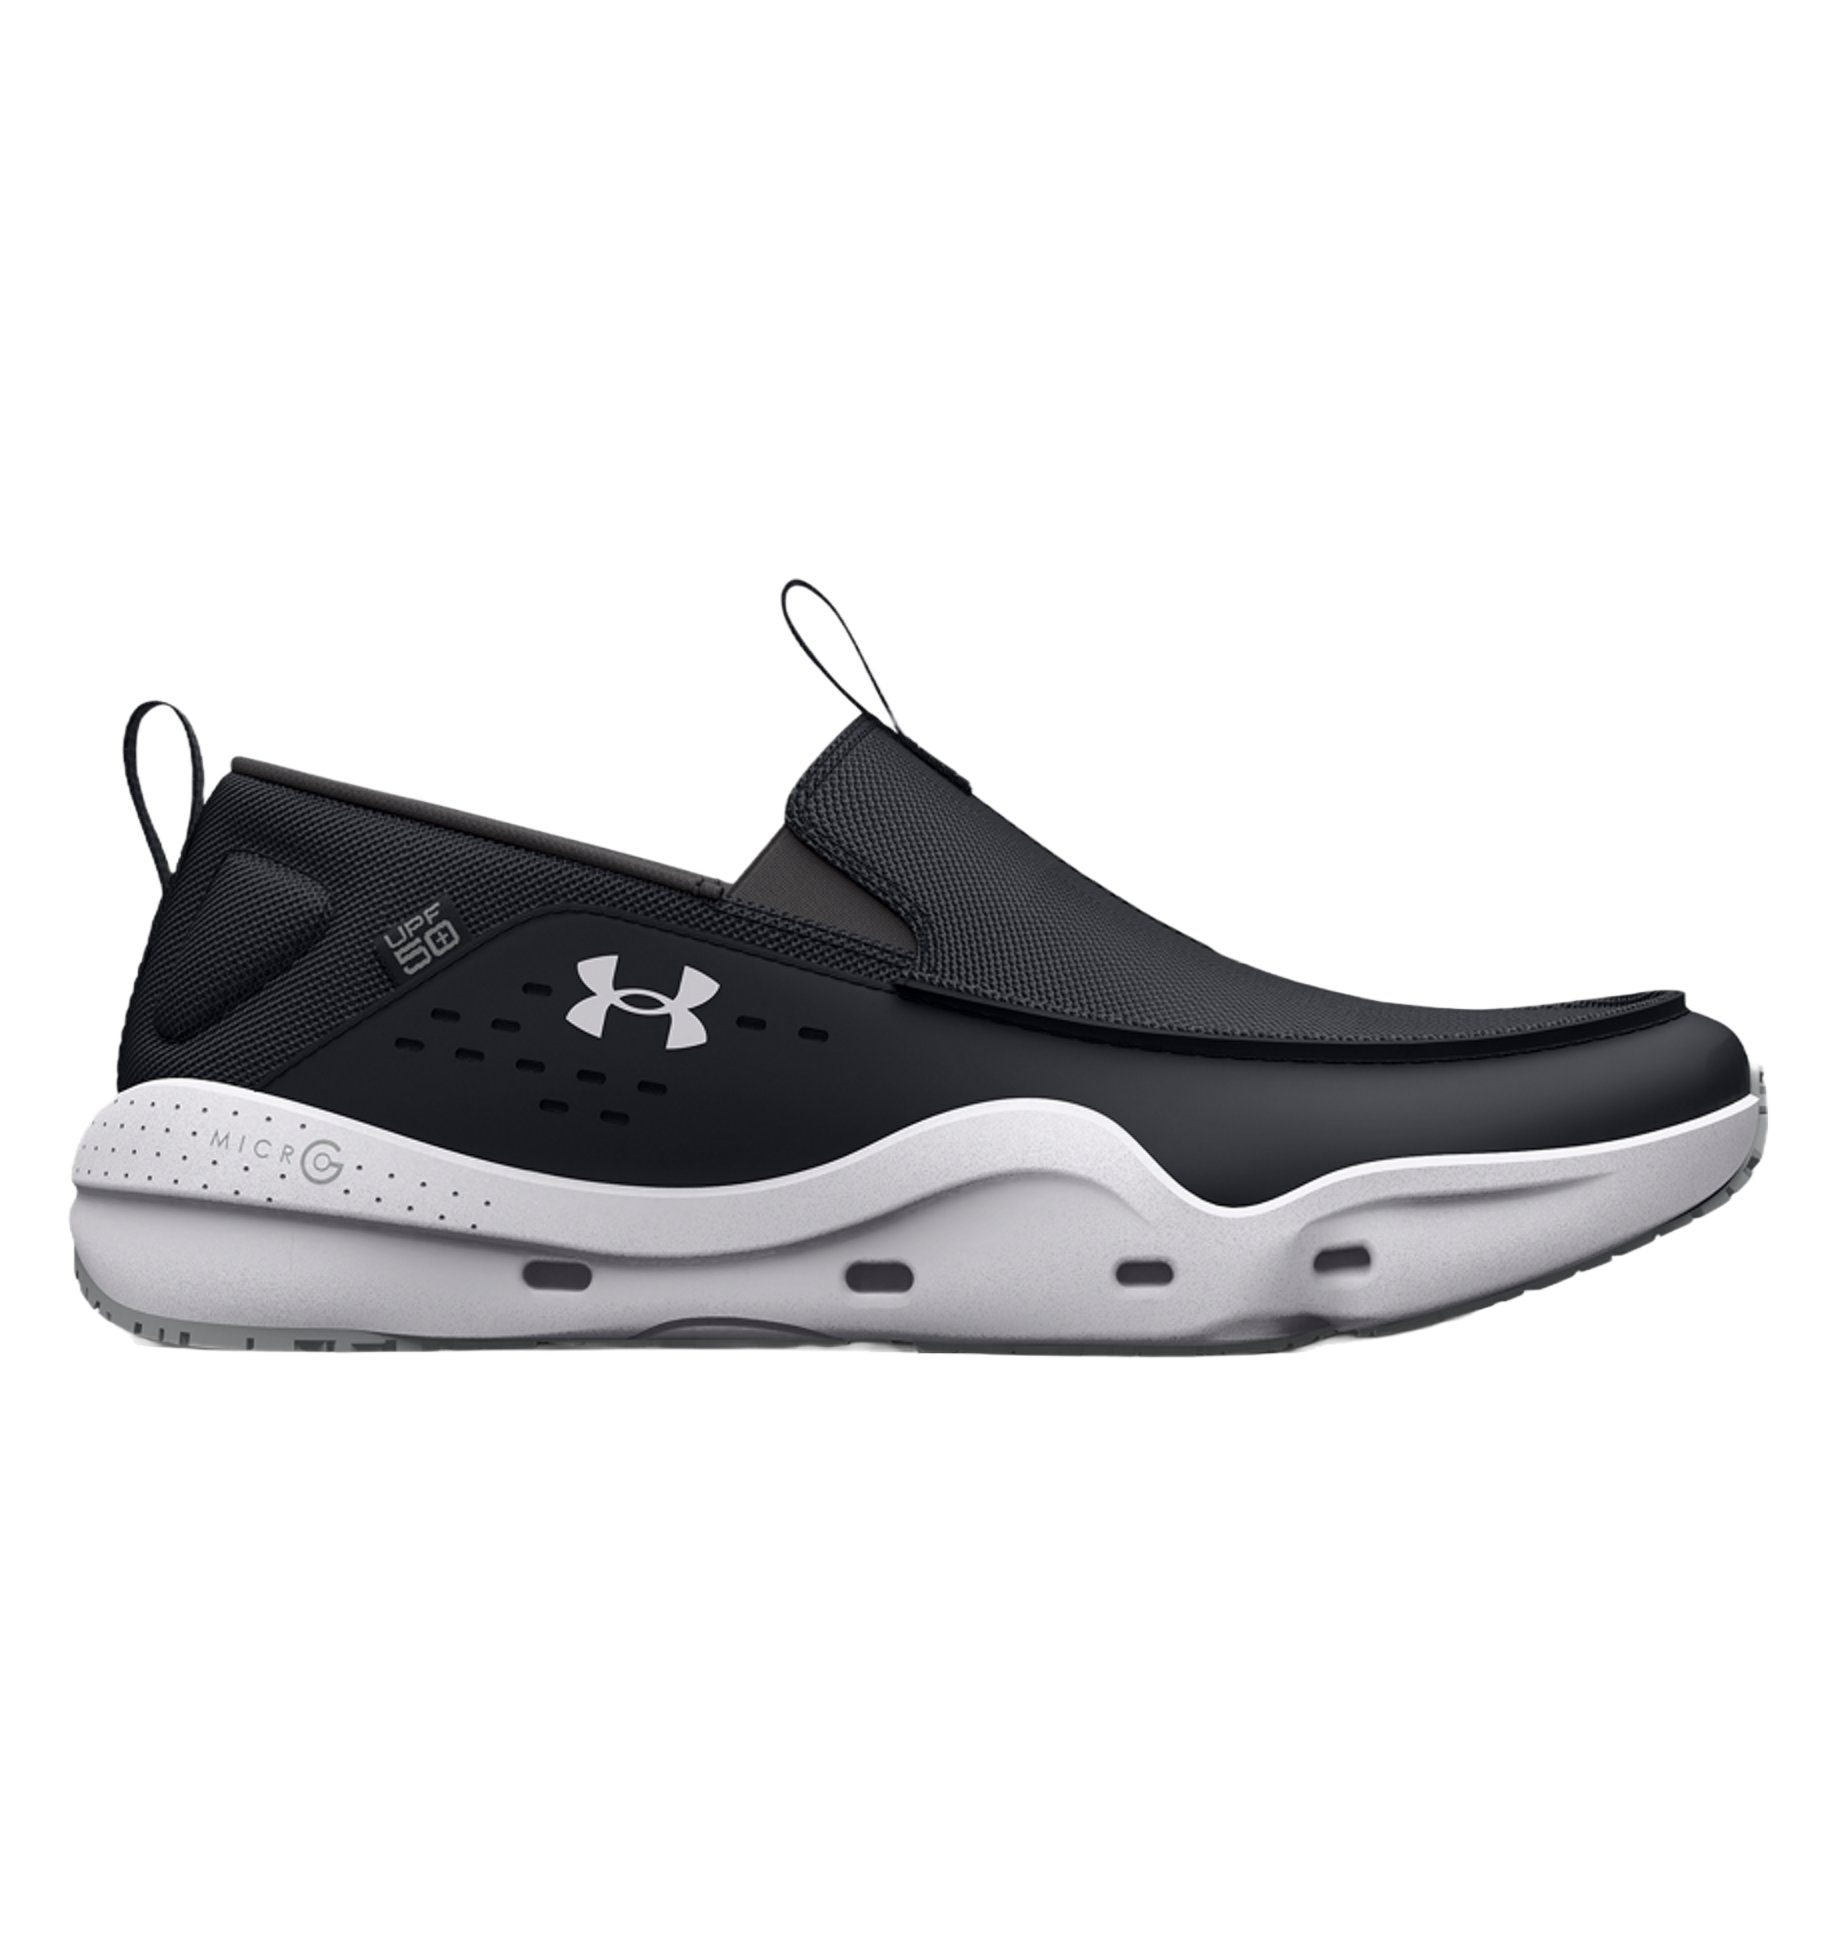 Under Armour Micro G Kilchis Slip Recover Fishing  - Mens